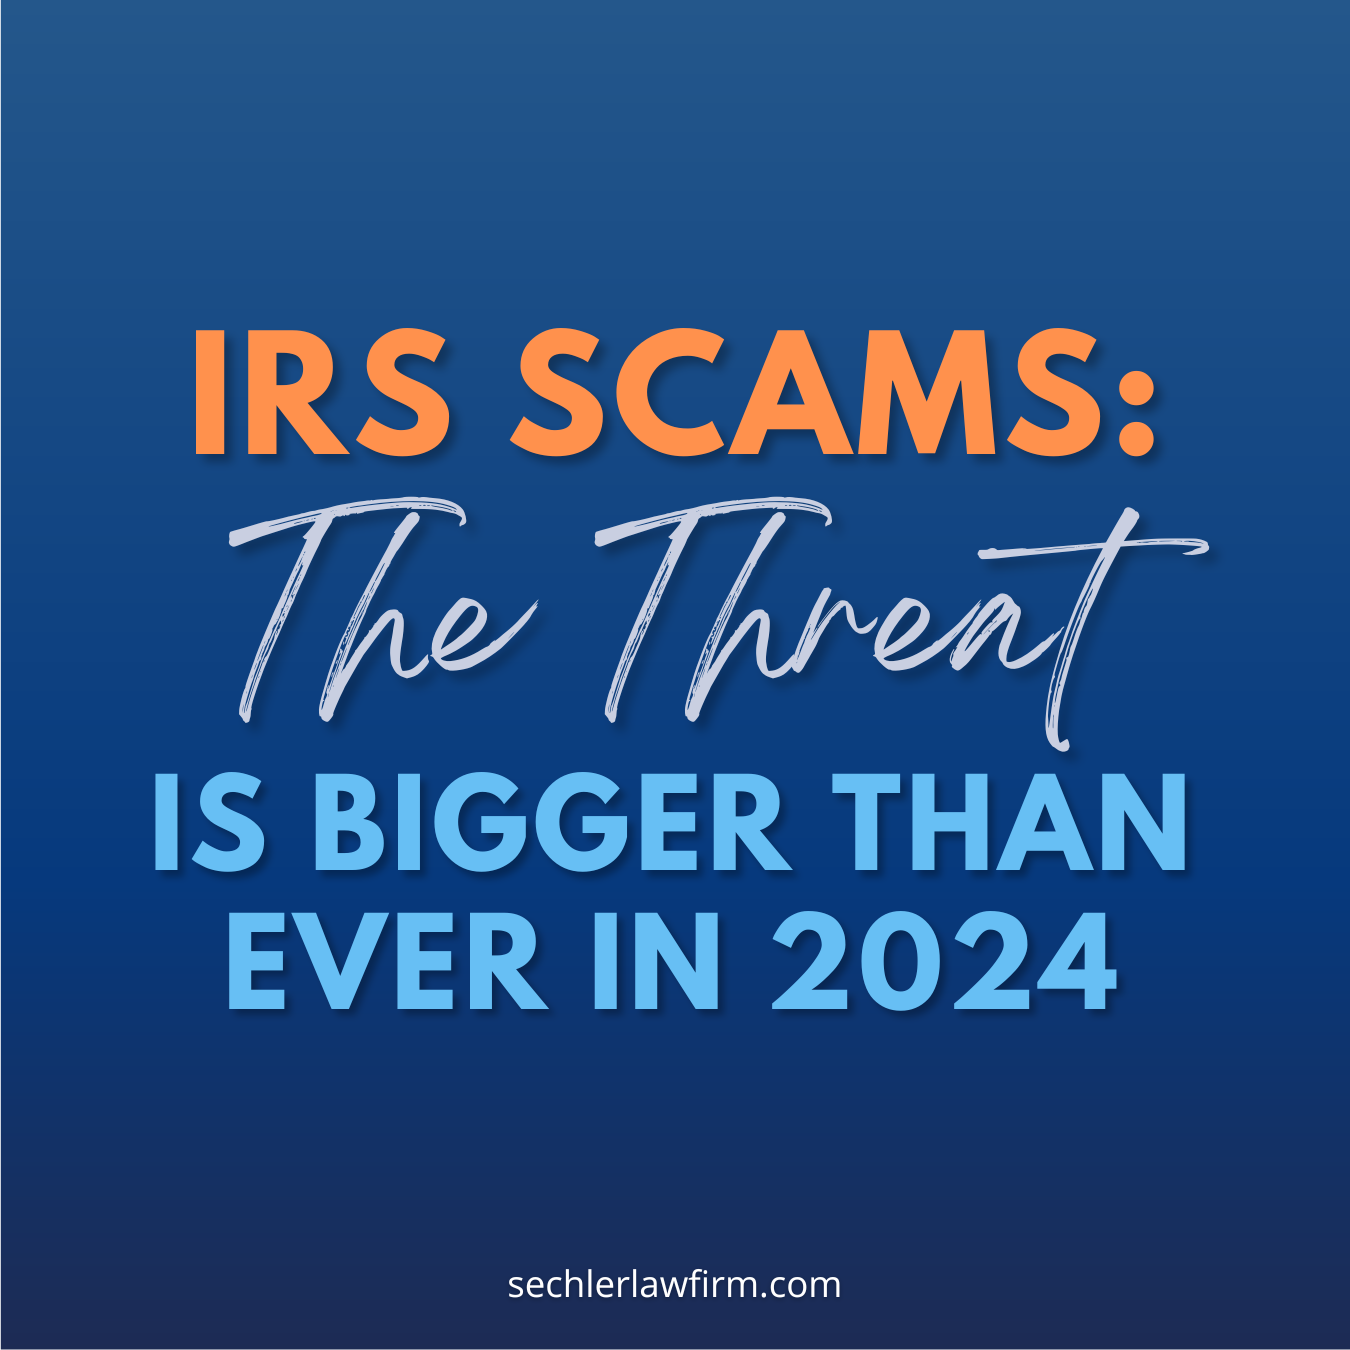 Don’t be a Victim: The IRS Scams Threat is Bigger Than Ever in 2024